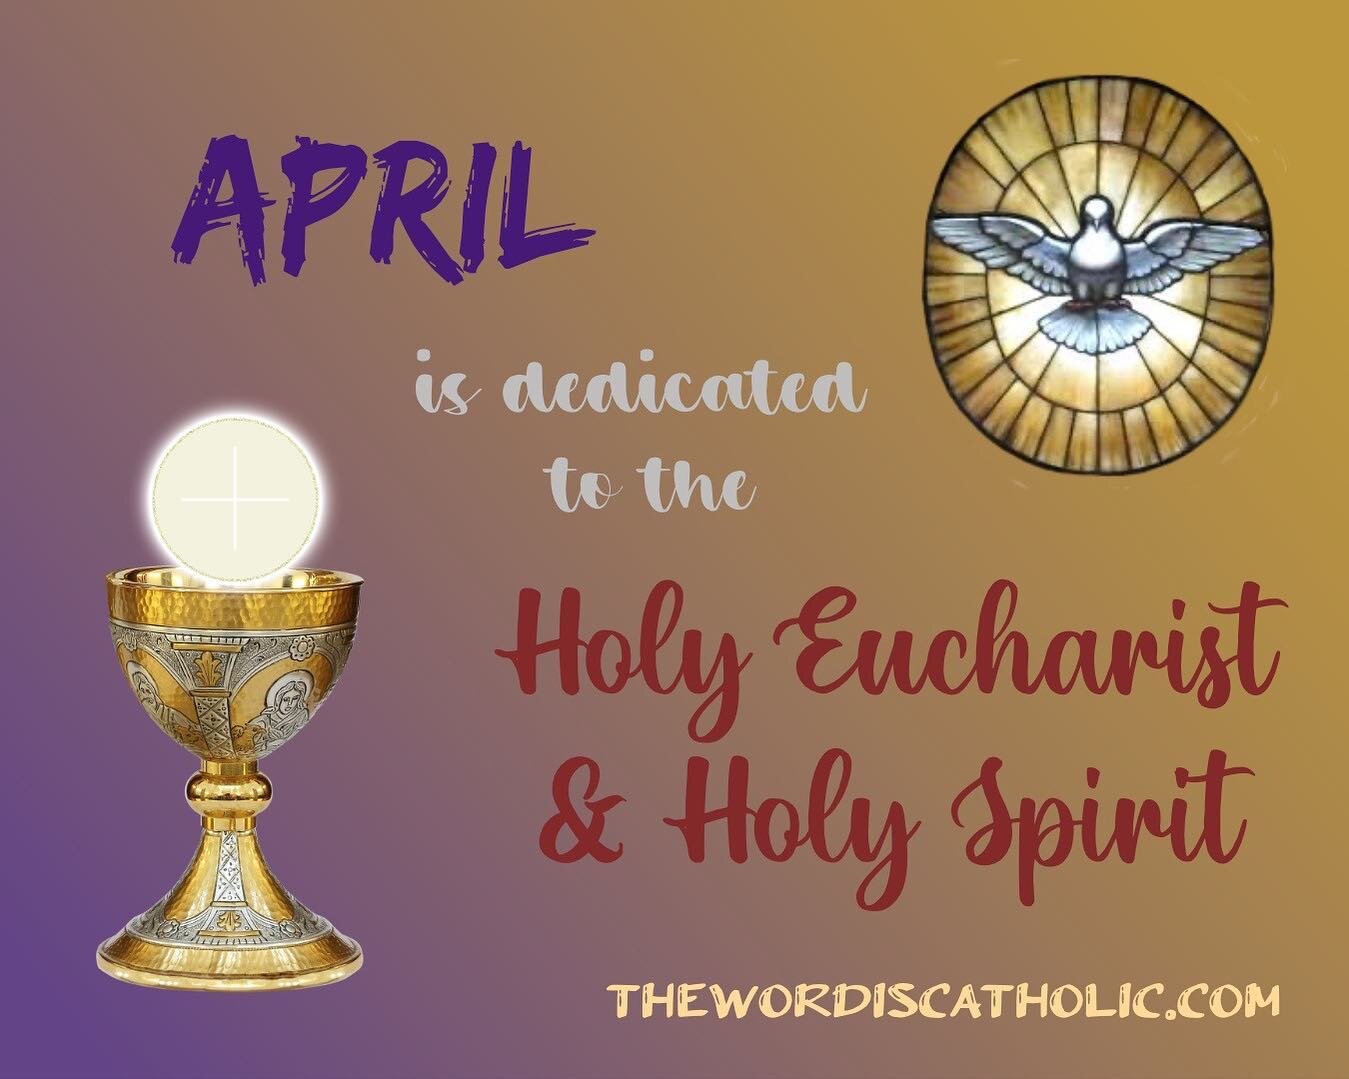 April is dedicated to both the Holy Eucharist and the Holy Spirit. 
.
Even when Easter falls in March, the Easter season continues into April. During the Easter season, we increase our devotion to the presence of Jesus in the Holy Eucharist rememberi